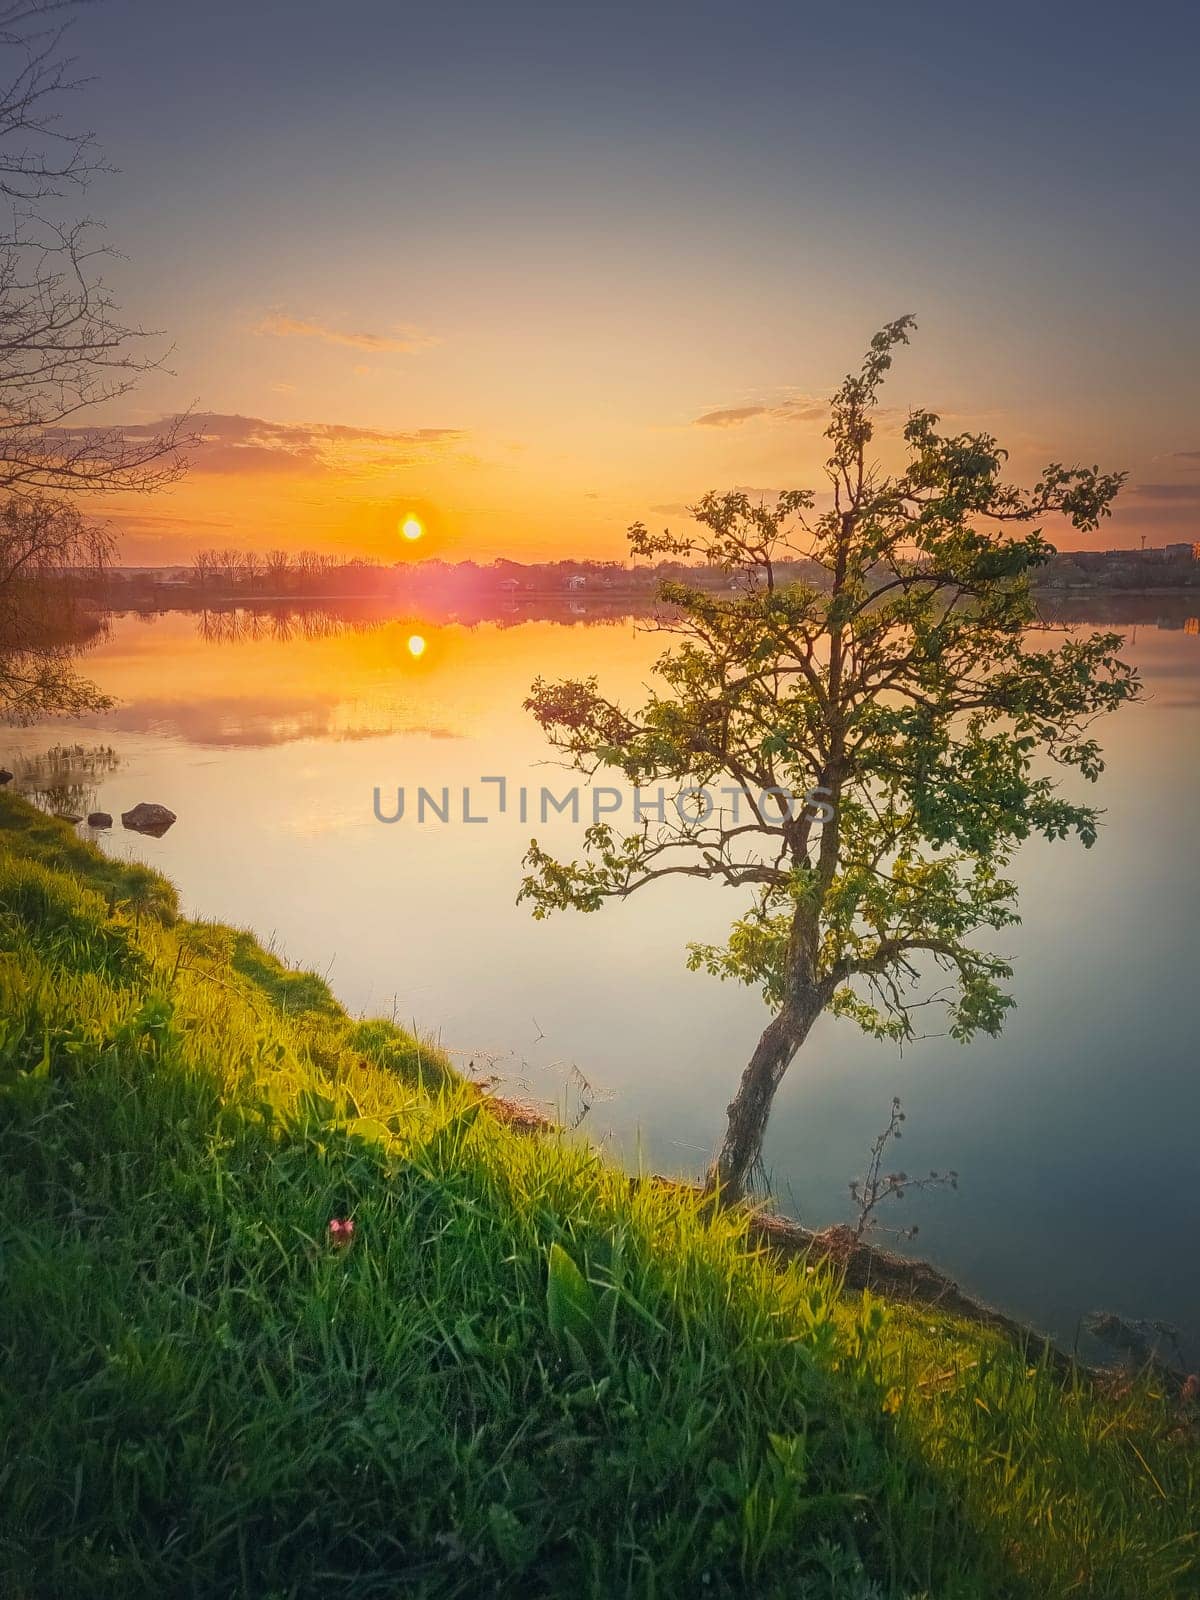 Sundown scene at the lake with a single tree on the hill. Vibrant sunset reflecting in the pond calm water by psychoshadow